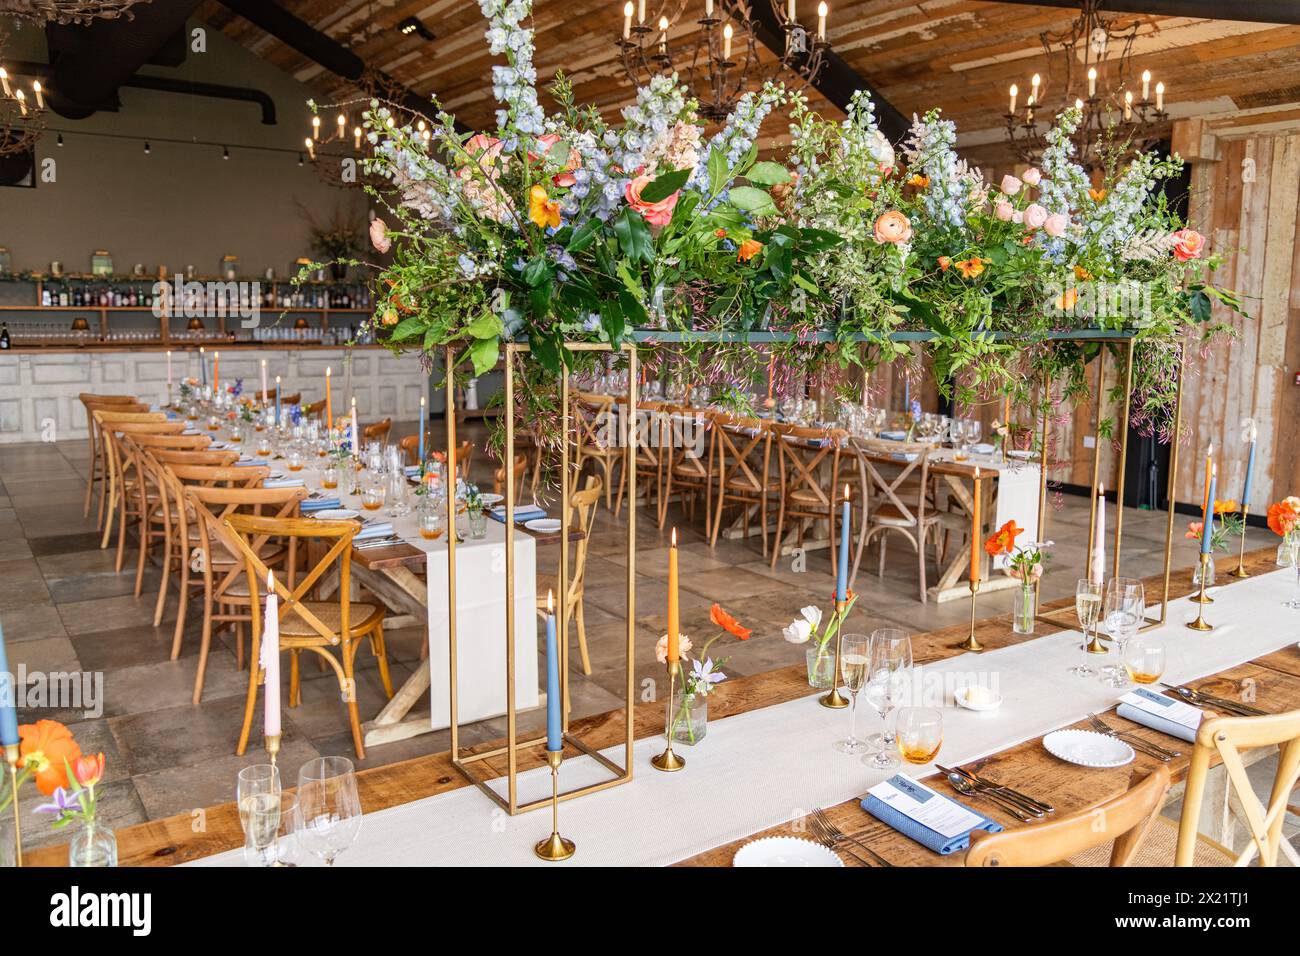 Laid out dinner tables for a wedding reception at Botley Hill Farm in Surrey, UK Stock Photo